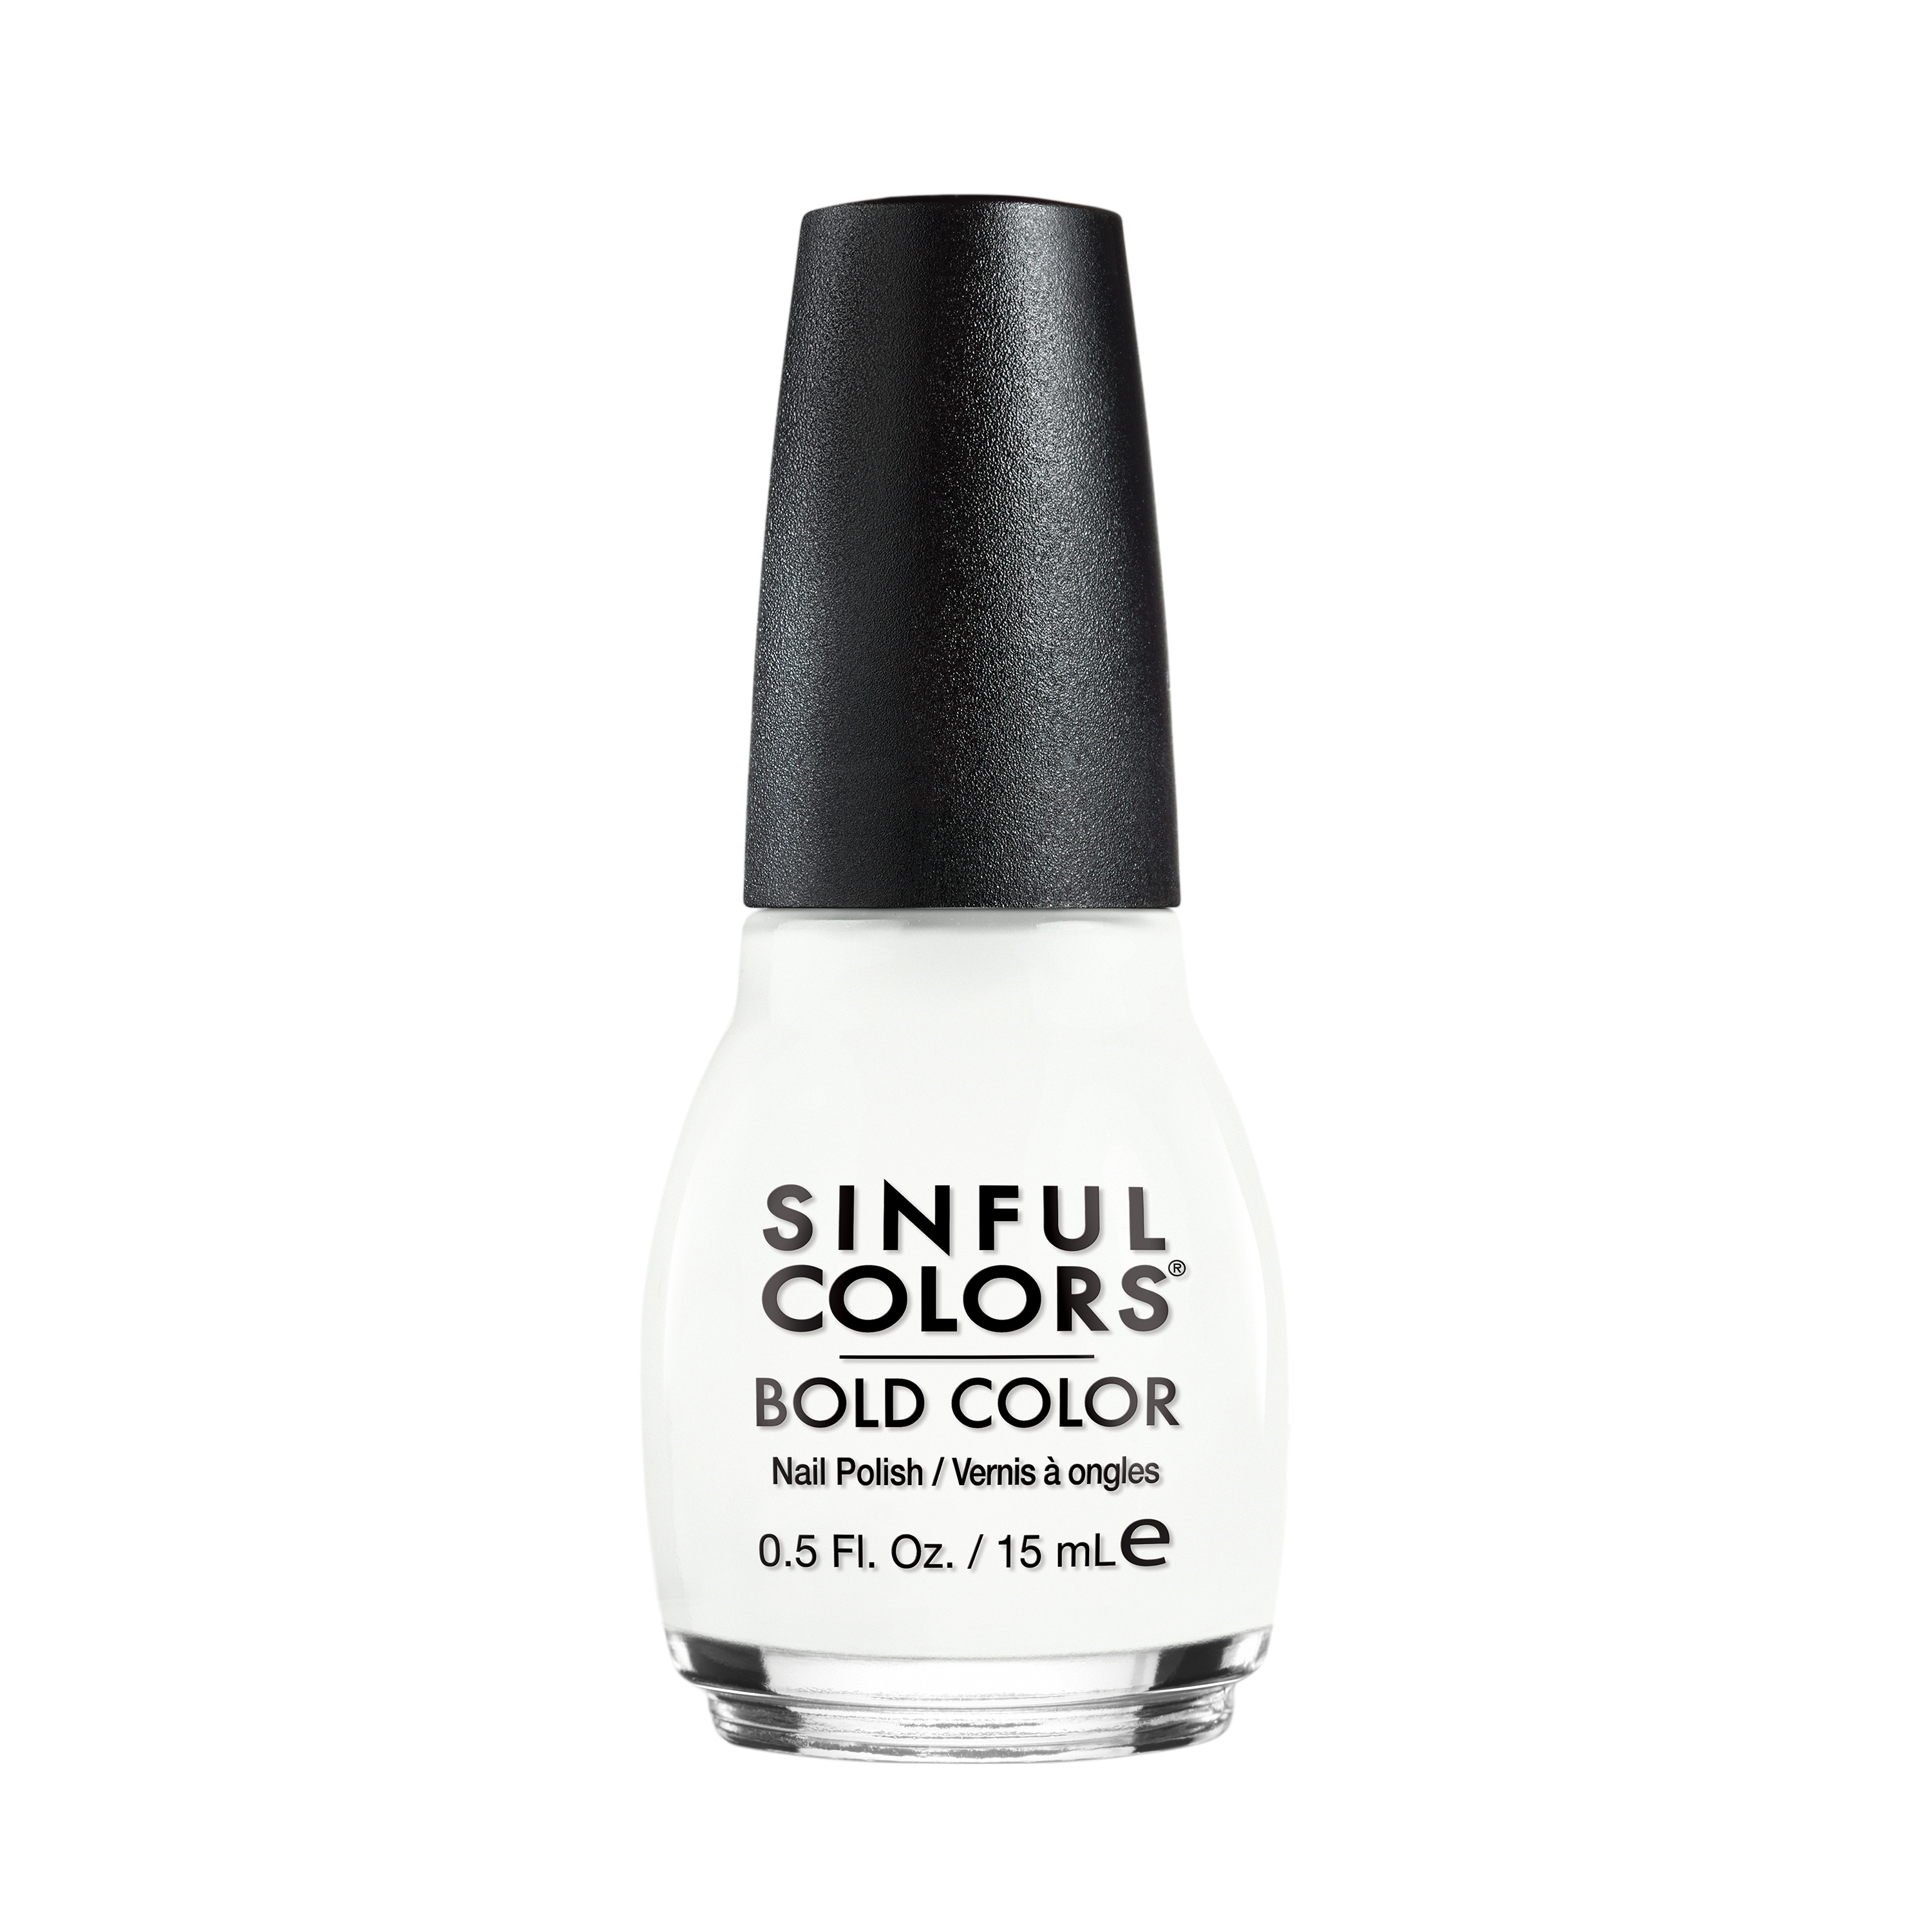 SinfulColors Bold Color, Snow Me White - image 1 of 2